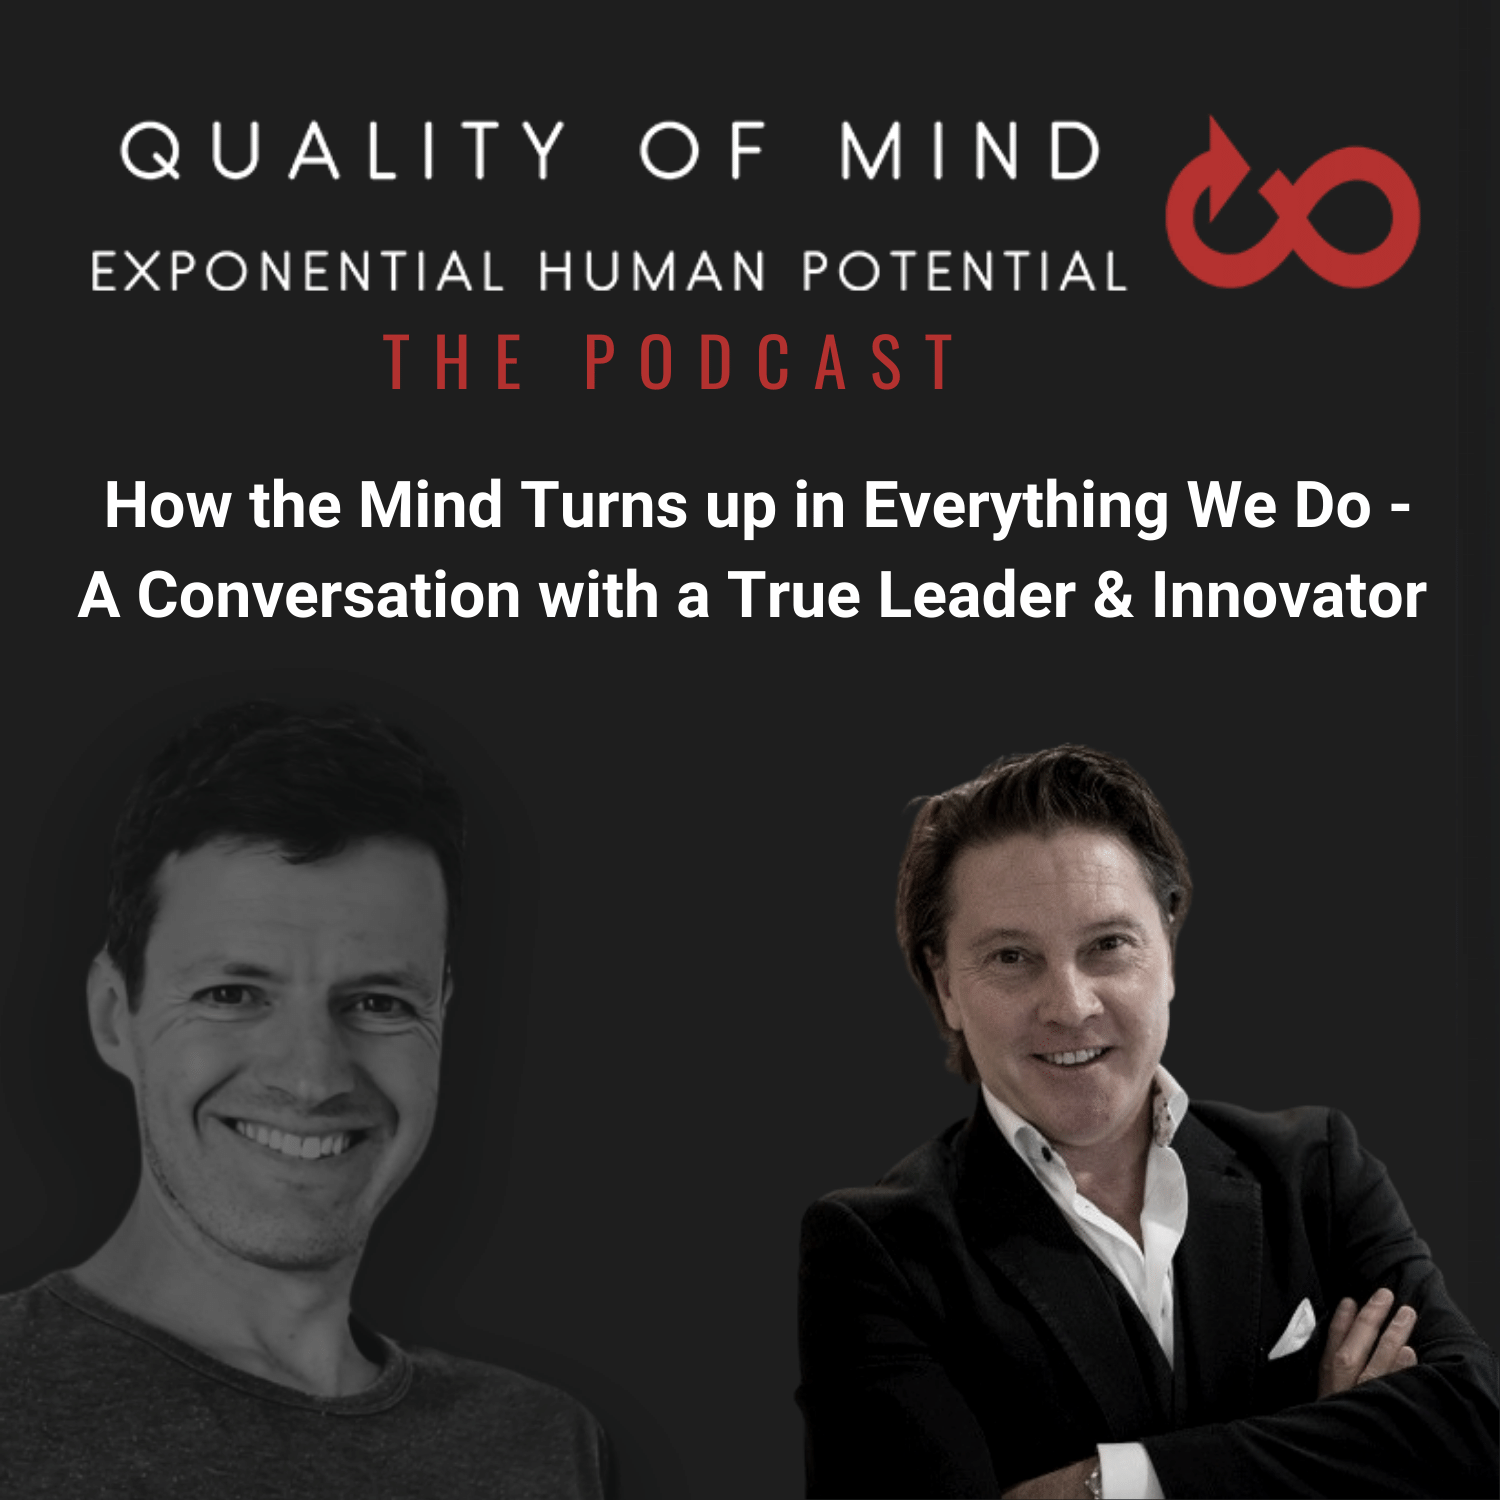 How the Mind Turns up in Everything We Do - A Conversation with a True Leader & Innovator